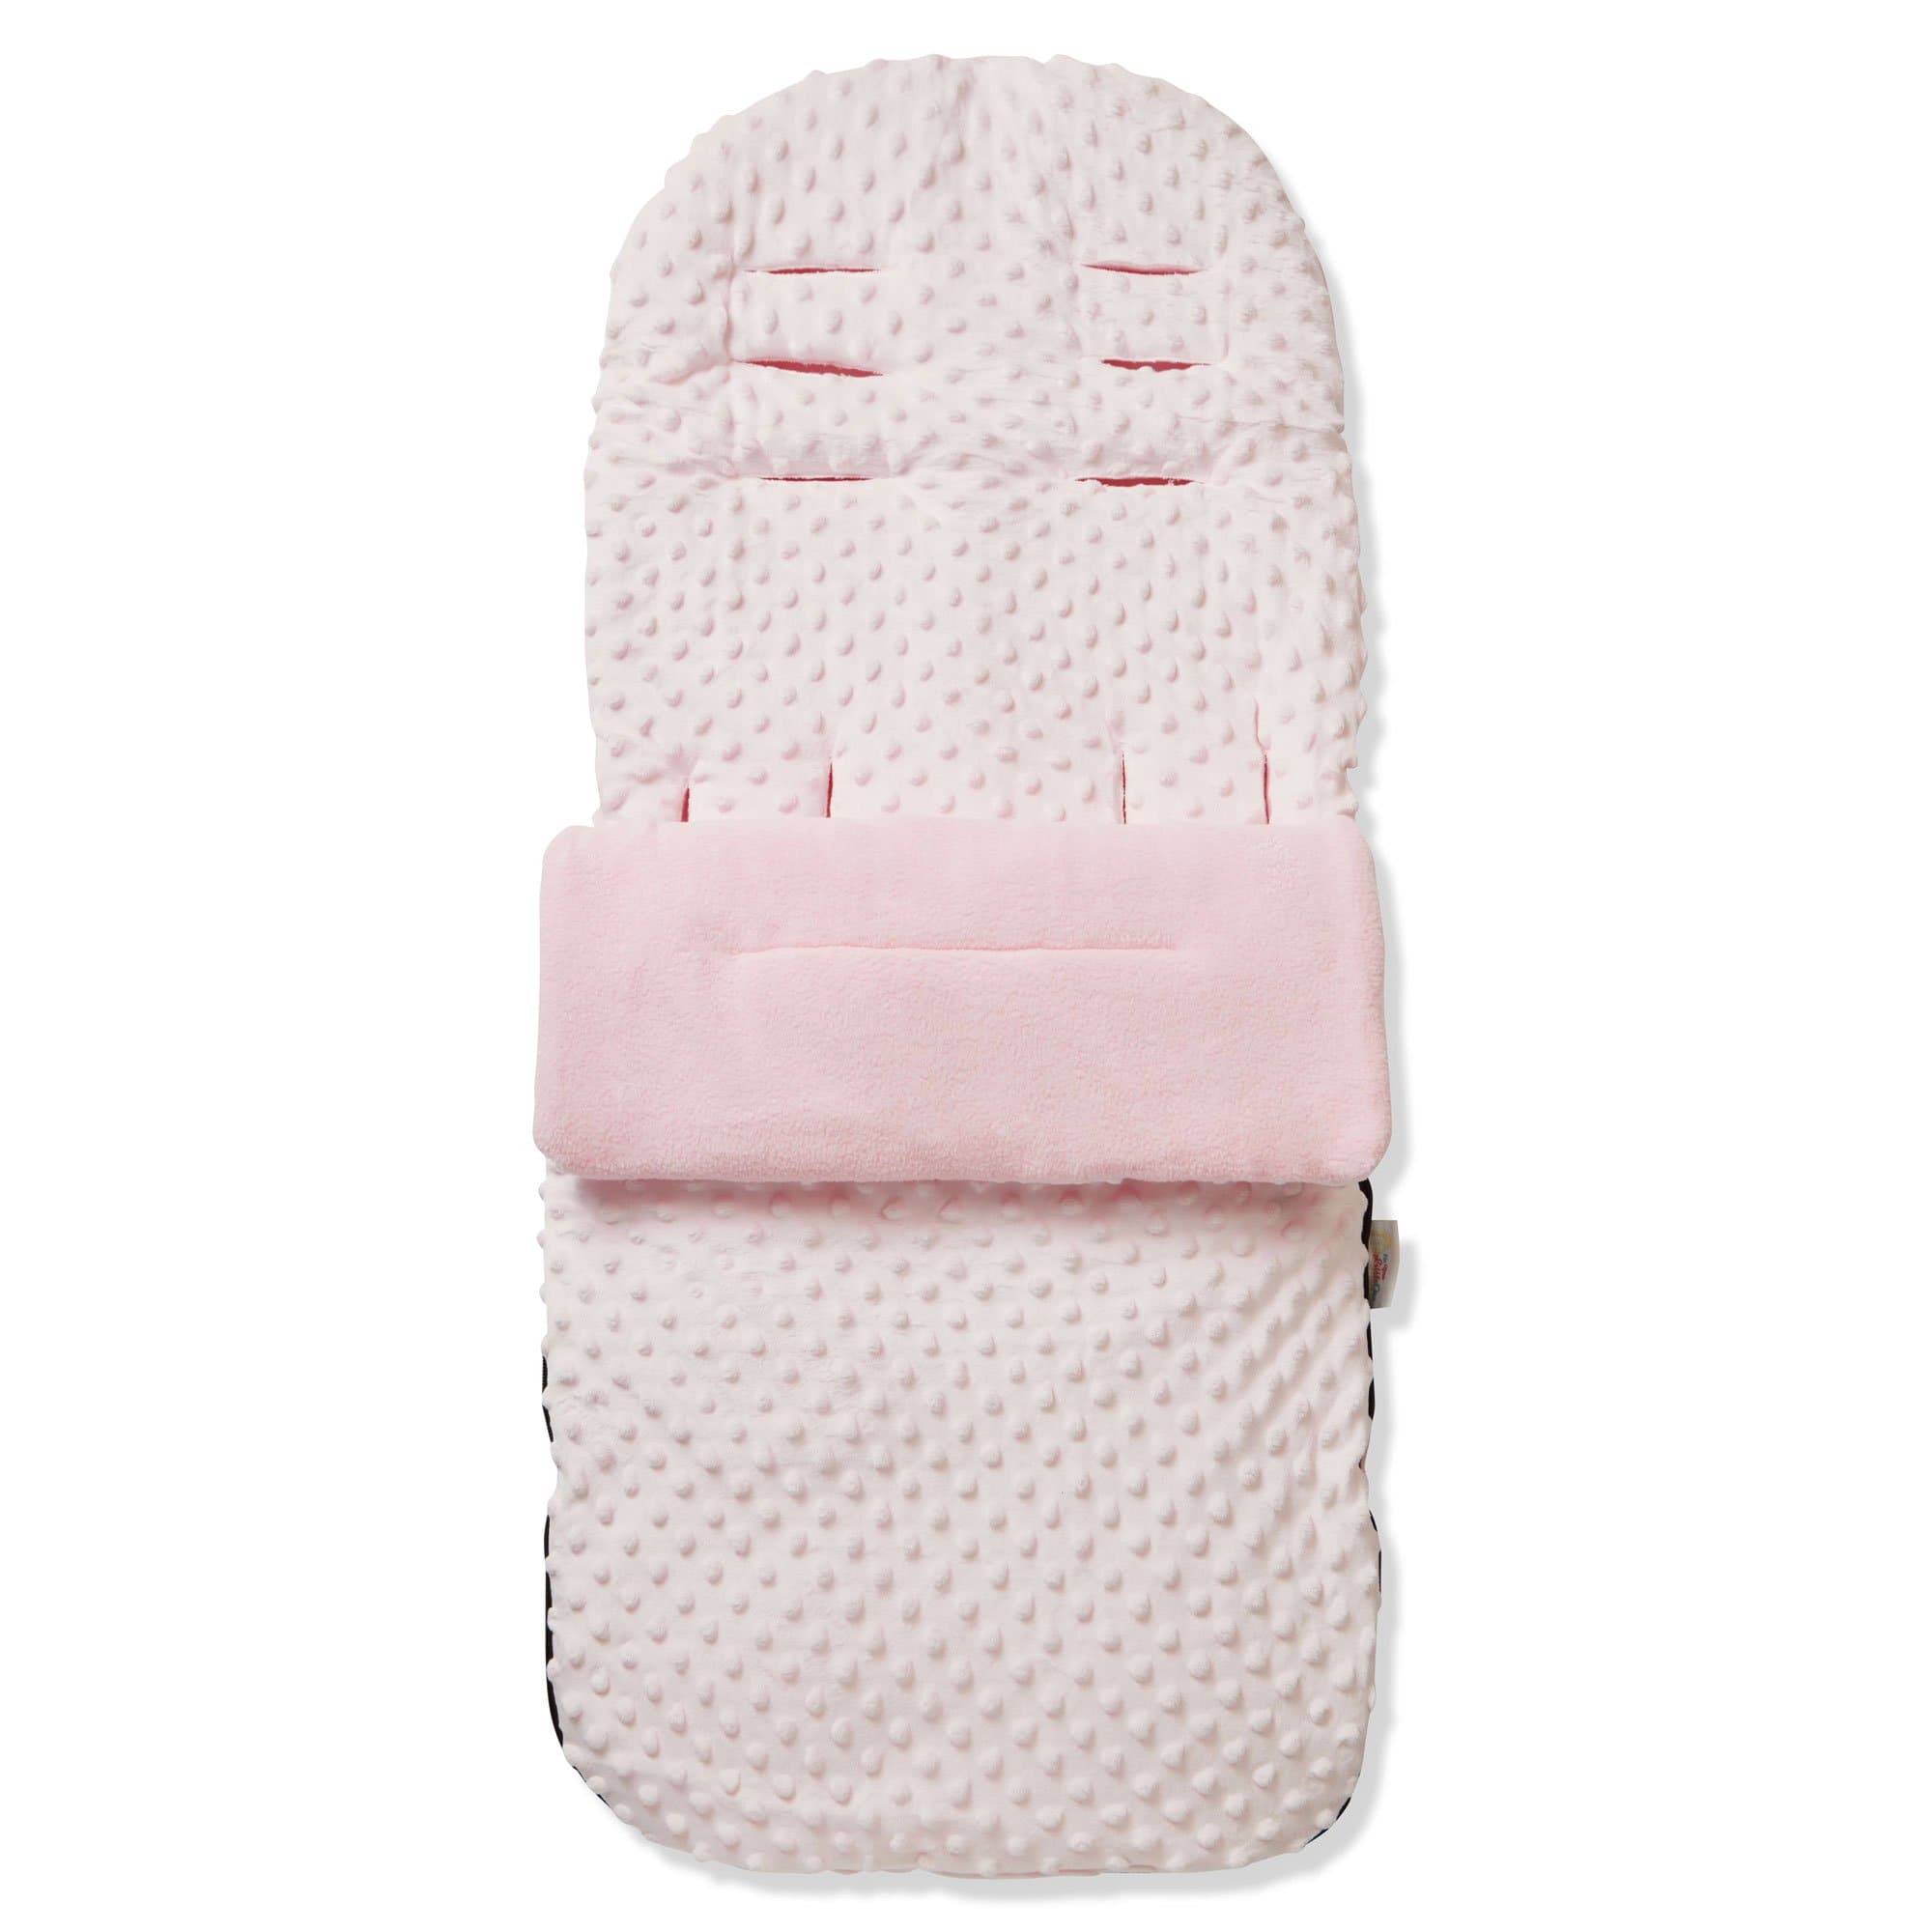 Dimple Footmuff / Cosy Toes Compatible with Petite Star - Pink / Fits All Models | For Your Little One